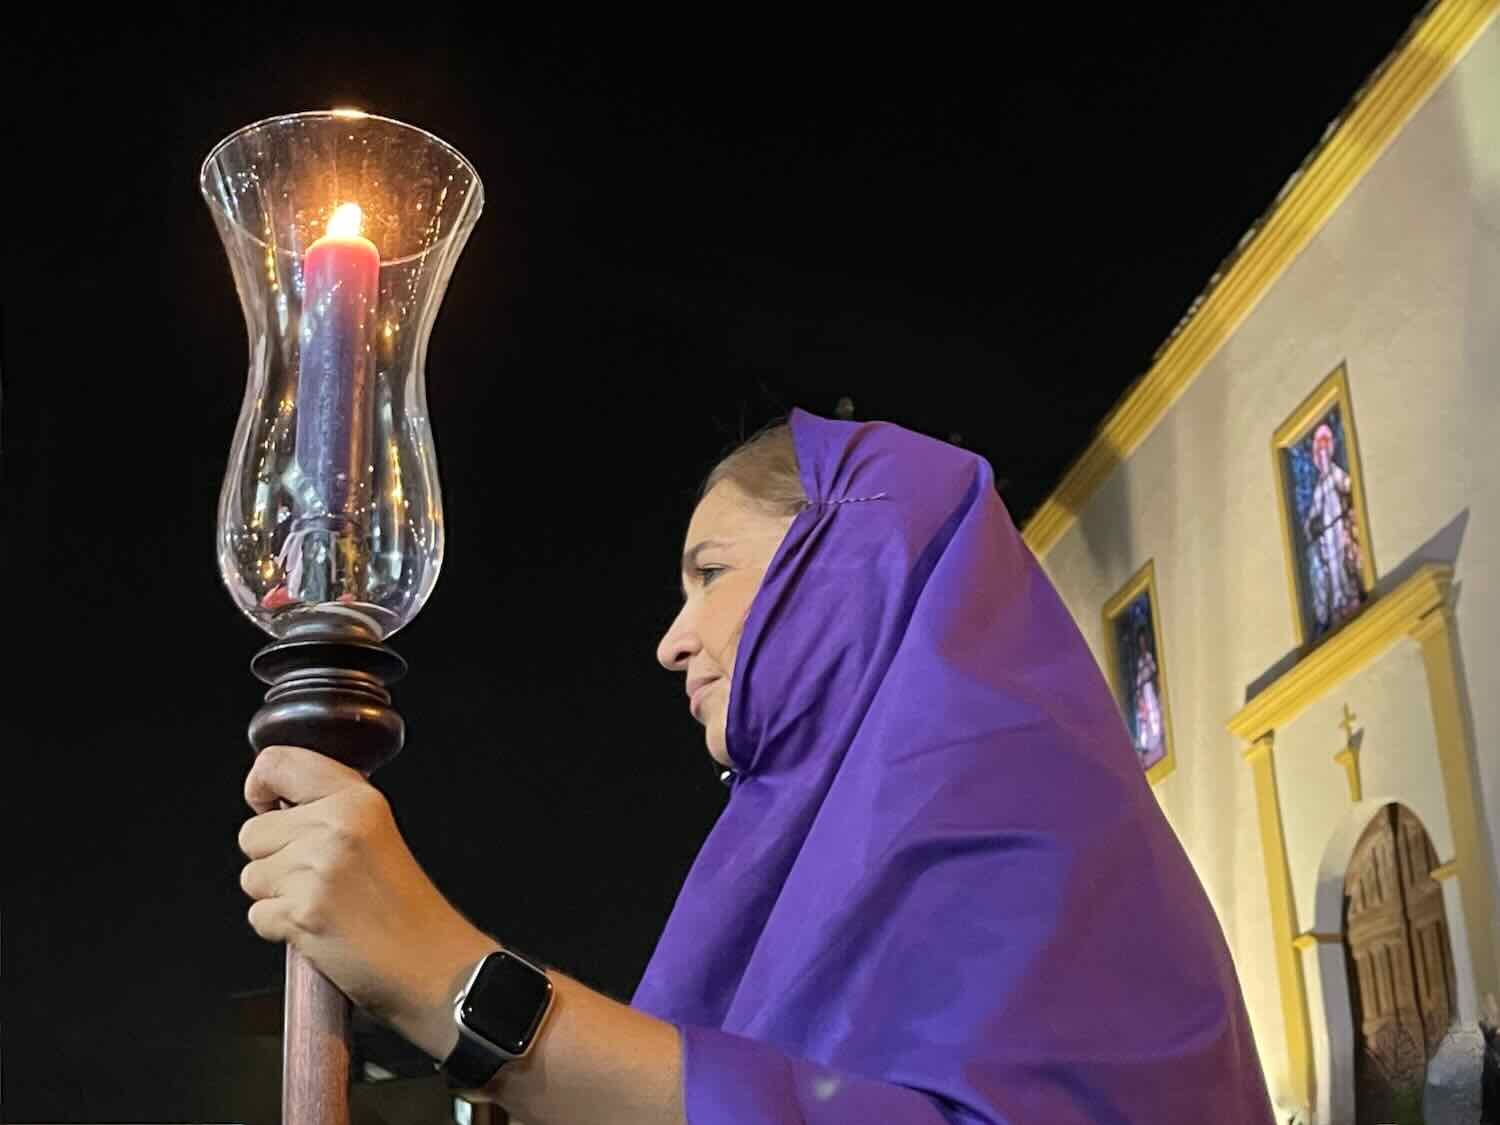 Acolytes in purple robes carried candles to light the way